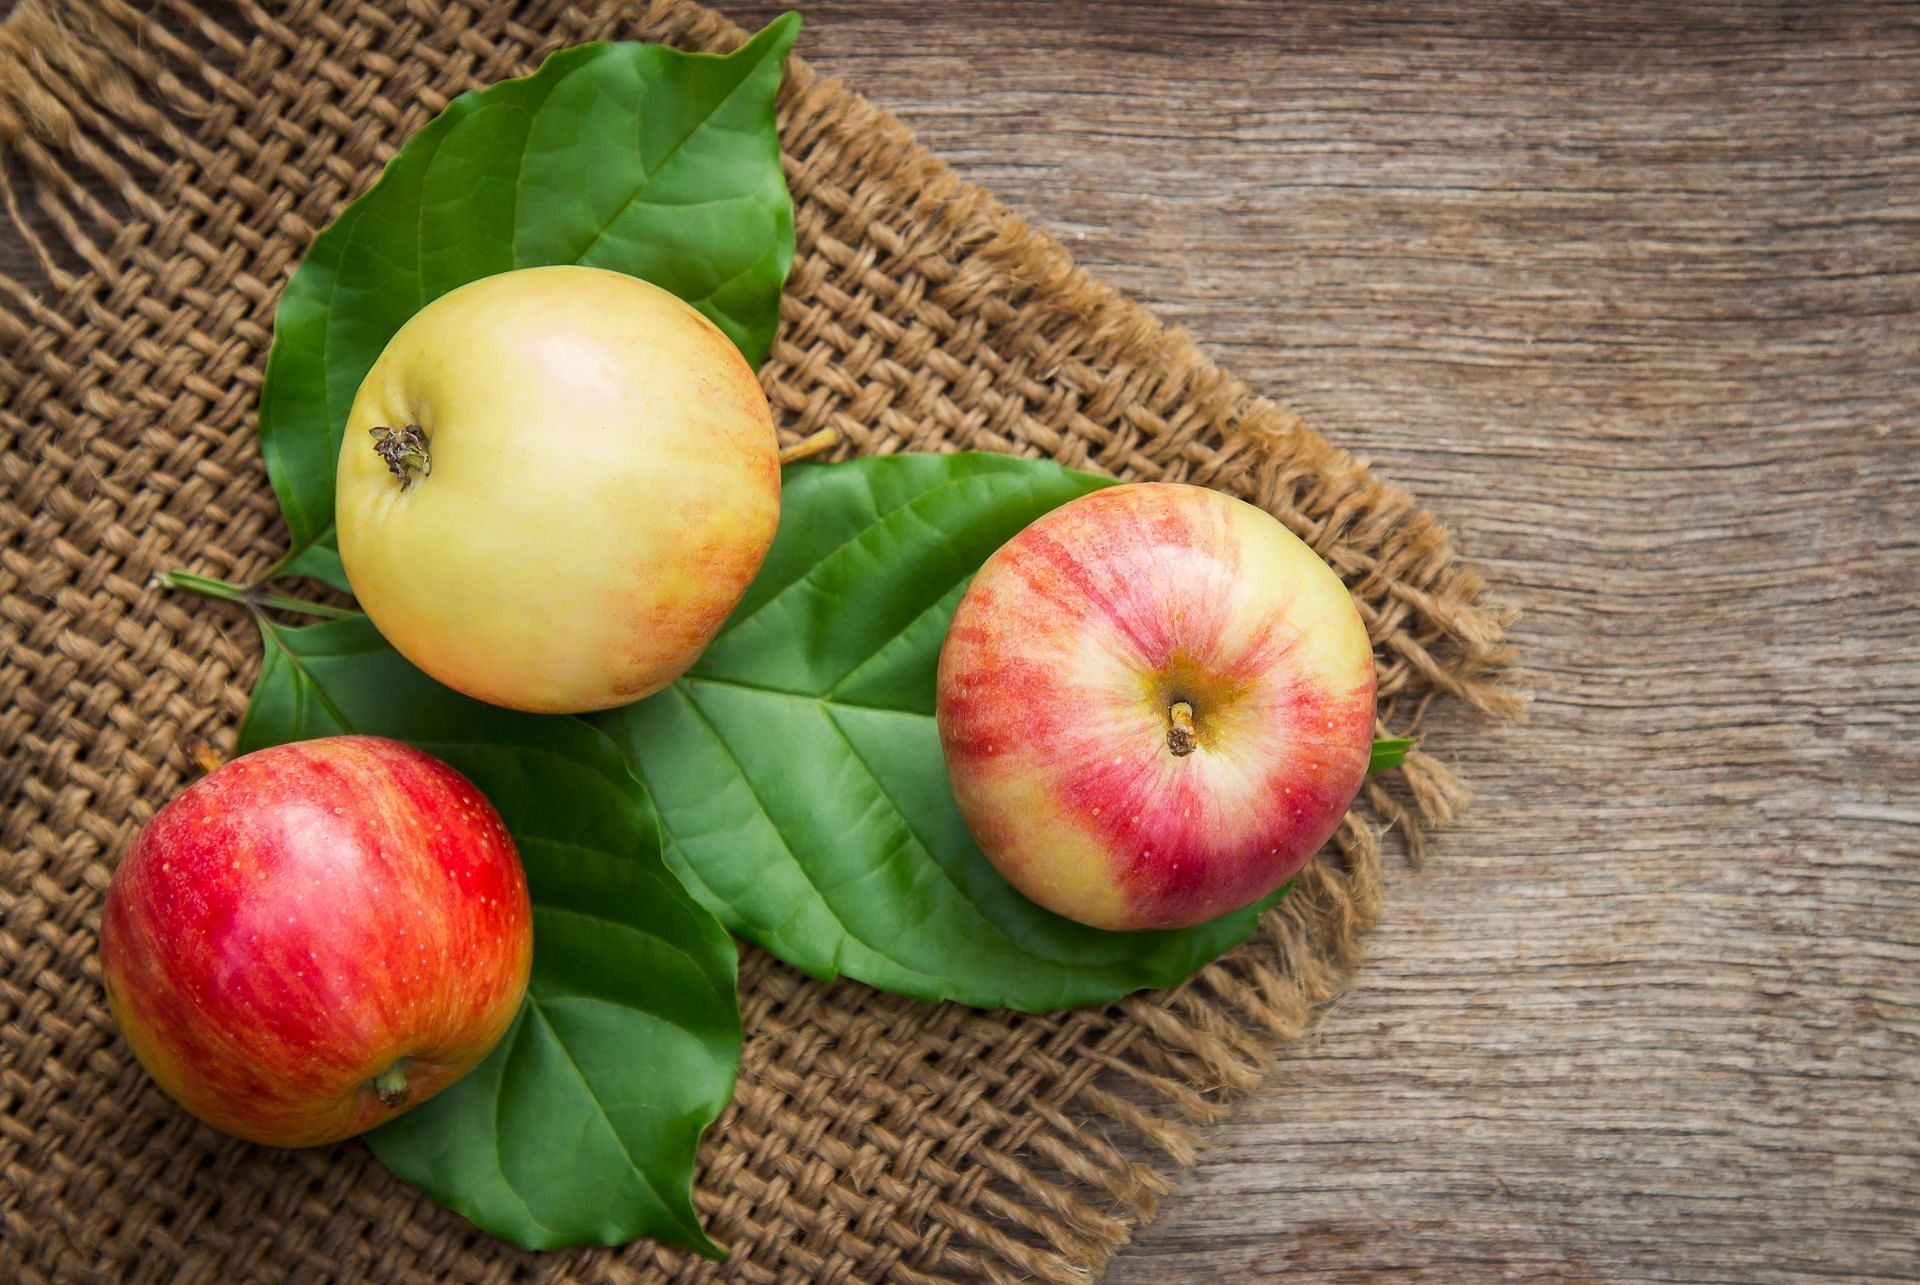 Apples for fresh breath (image sourced via Pexels / Photo by Aphiwat)